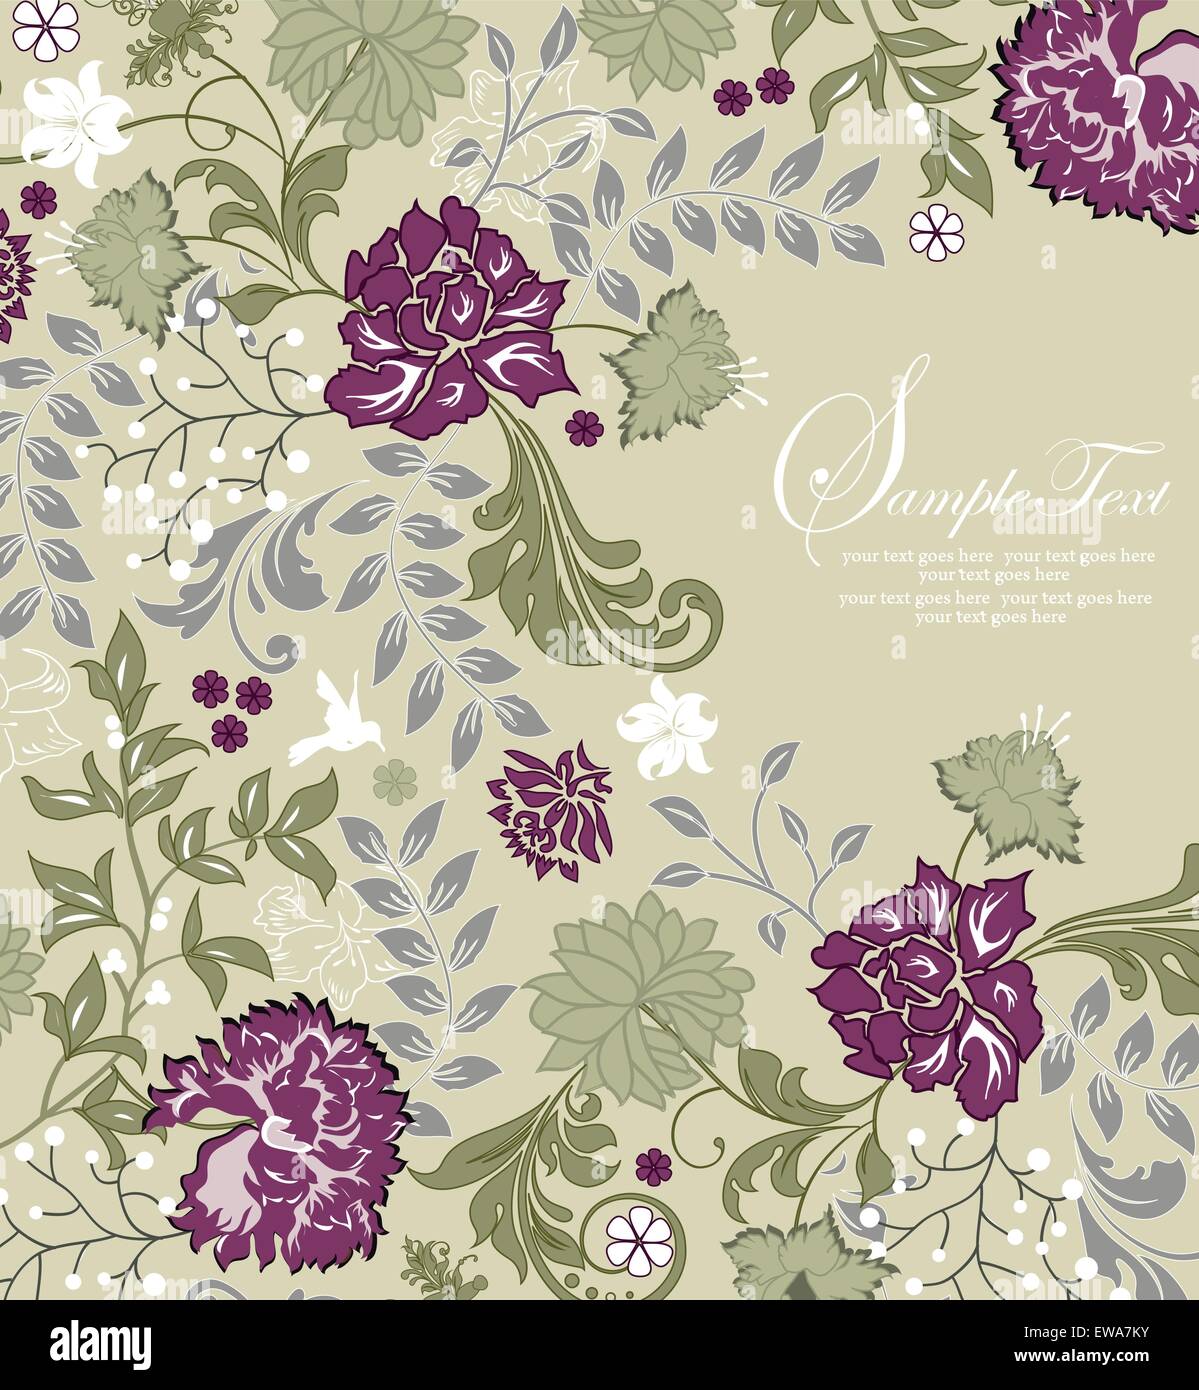 Vintage invitation card with ornate elegant retro abstract floral design, purple and green flowers and leaves on pale green background. Vector illustration. Stock Vector